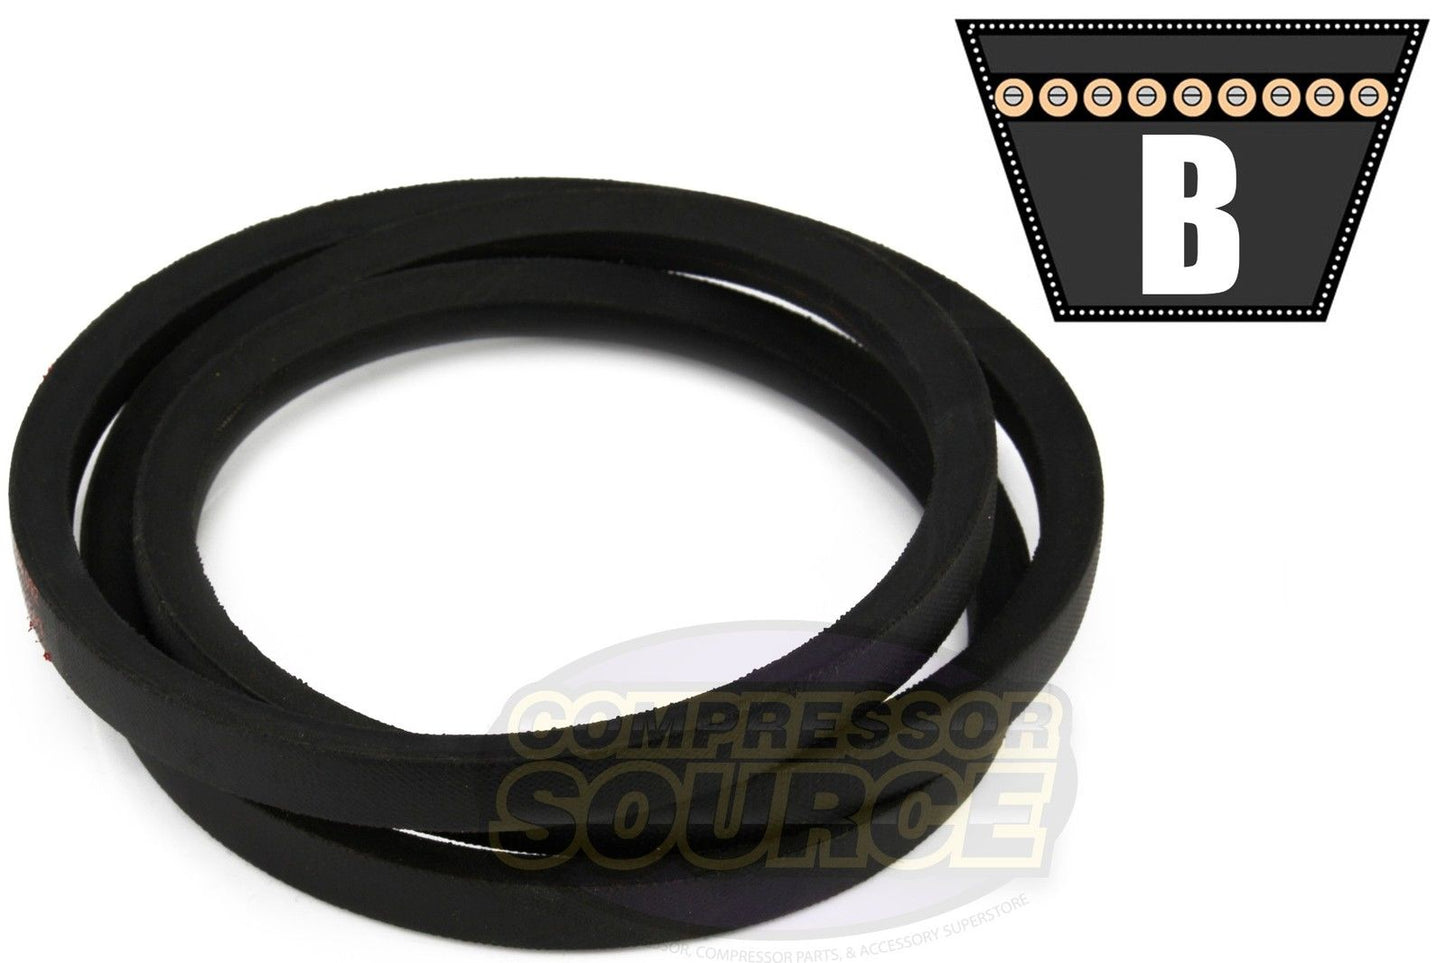 B46 Replacement High Quality Industrial & Lawn Mower 5/8" x49" V Belt 5L490